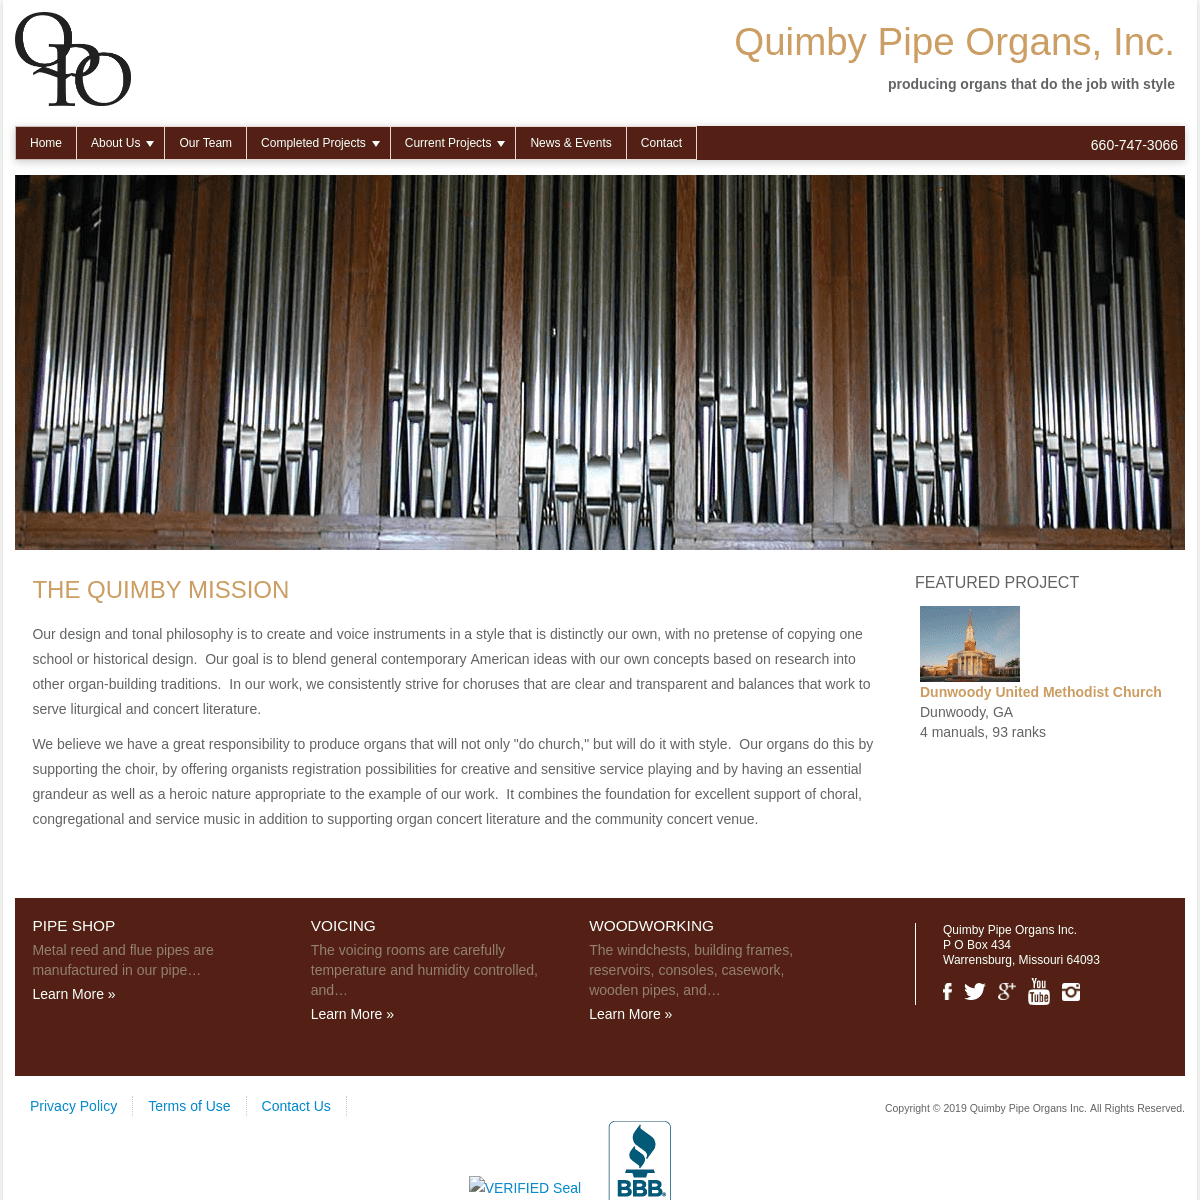 Producing both new and rebuilt organs that do the job with style. - Quimby Pipe Organs